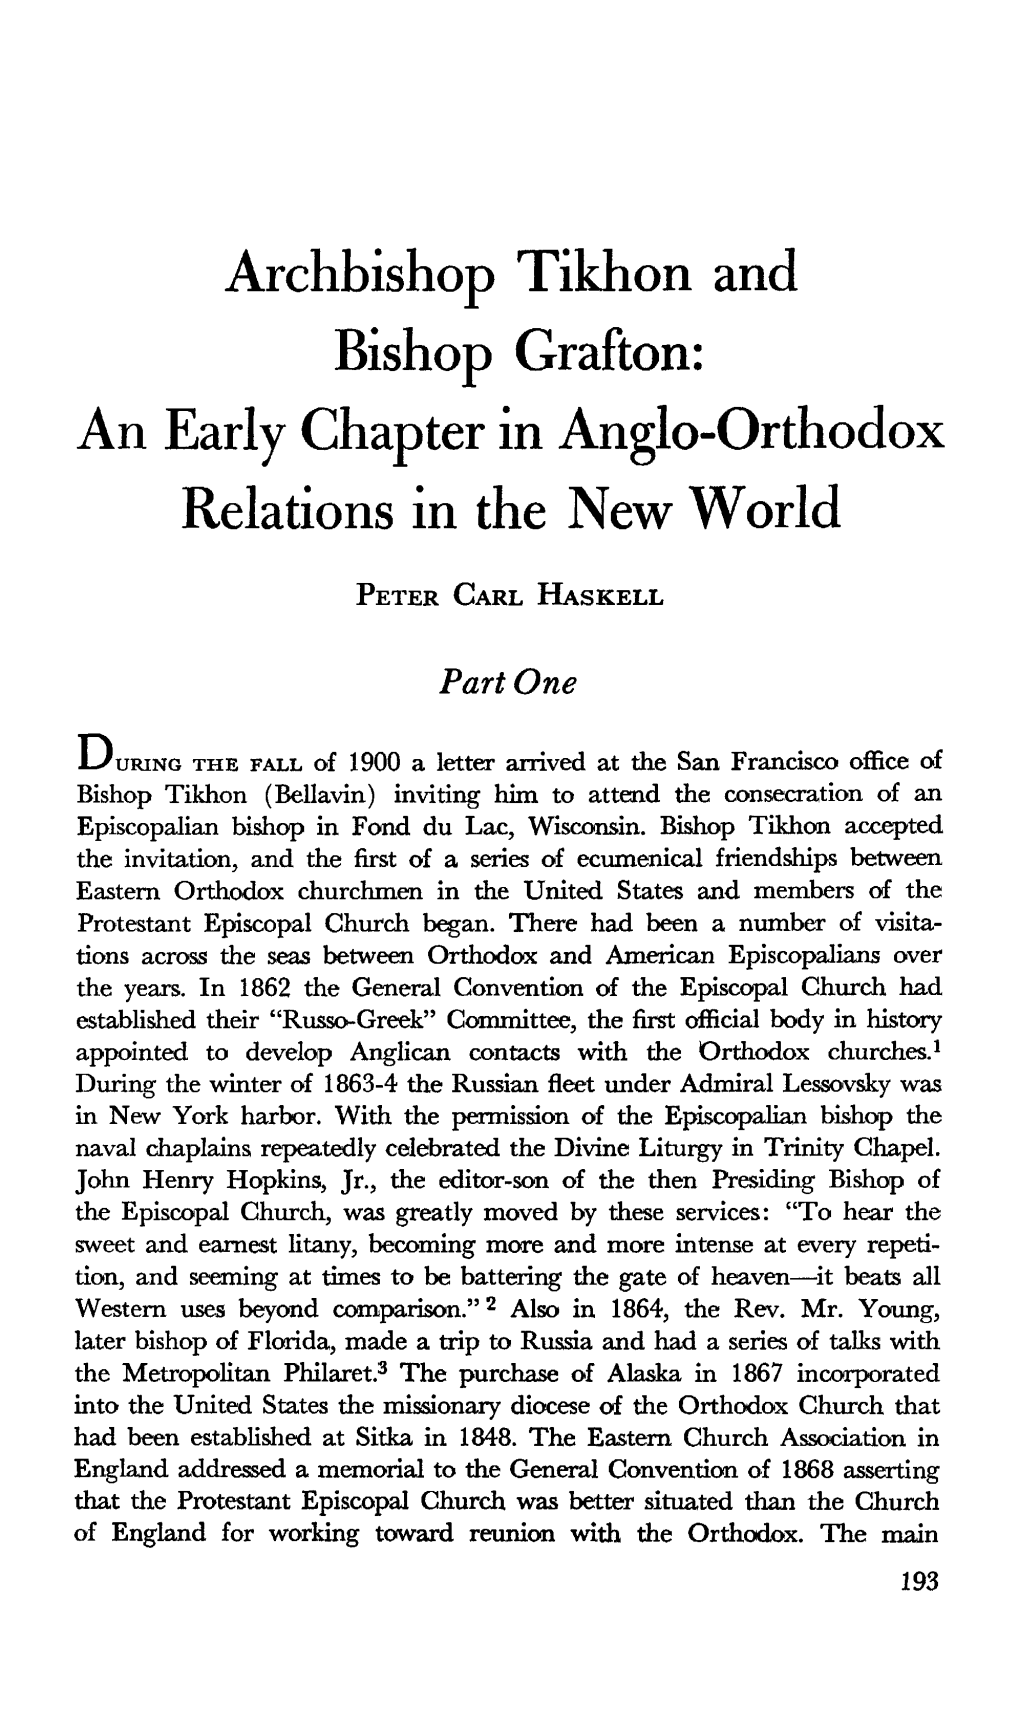 Archbishop Tikhon and Bishop Grafton: an Early Chapter in Anglo-Orthodox Relations in the New World